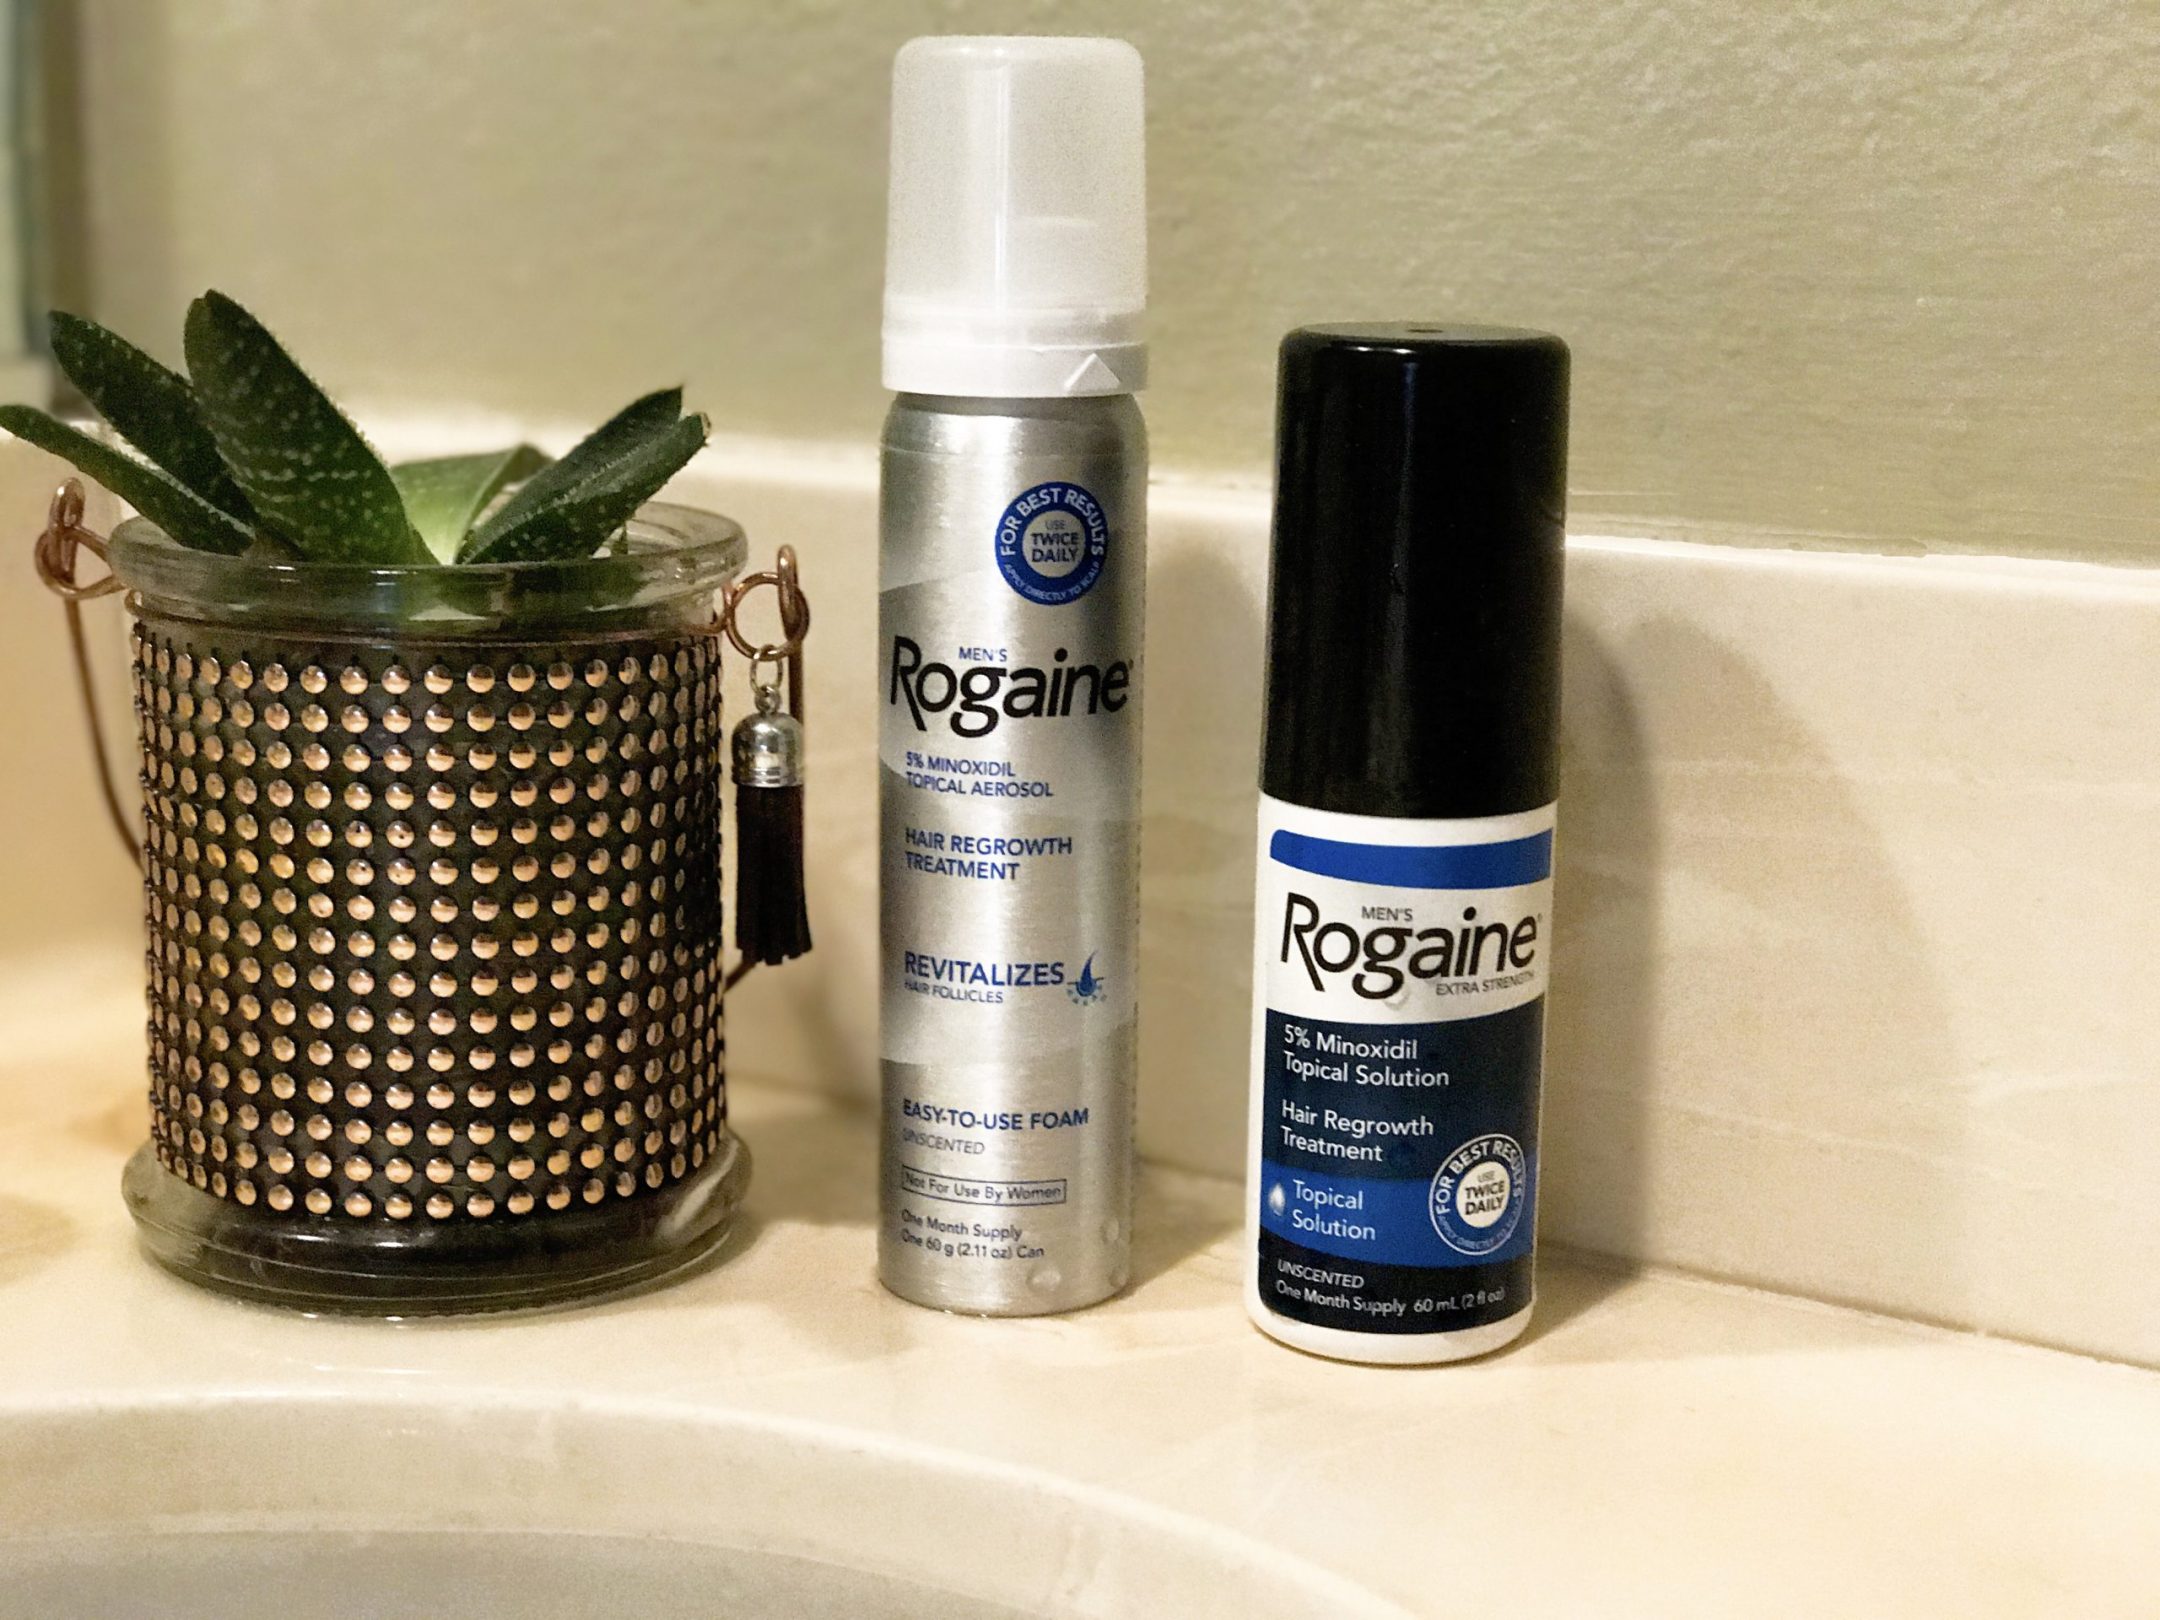 Getting ahead with Rogaine #headstart #rogaine men's beauty blogger